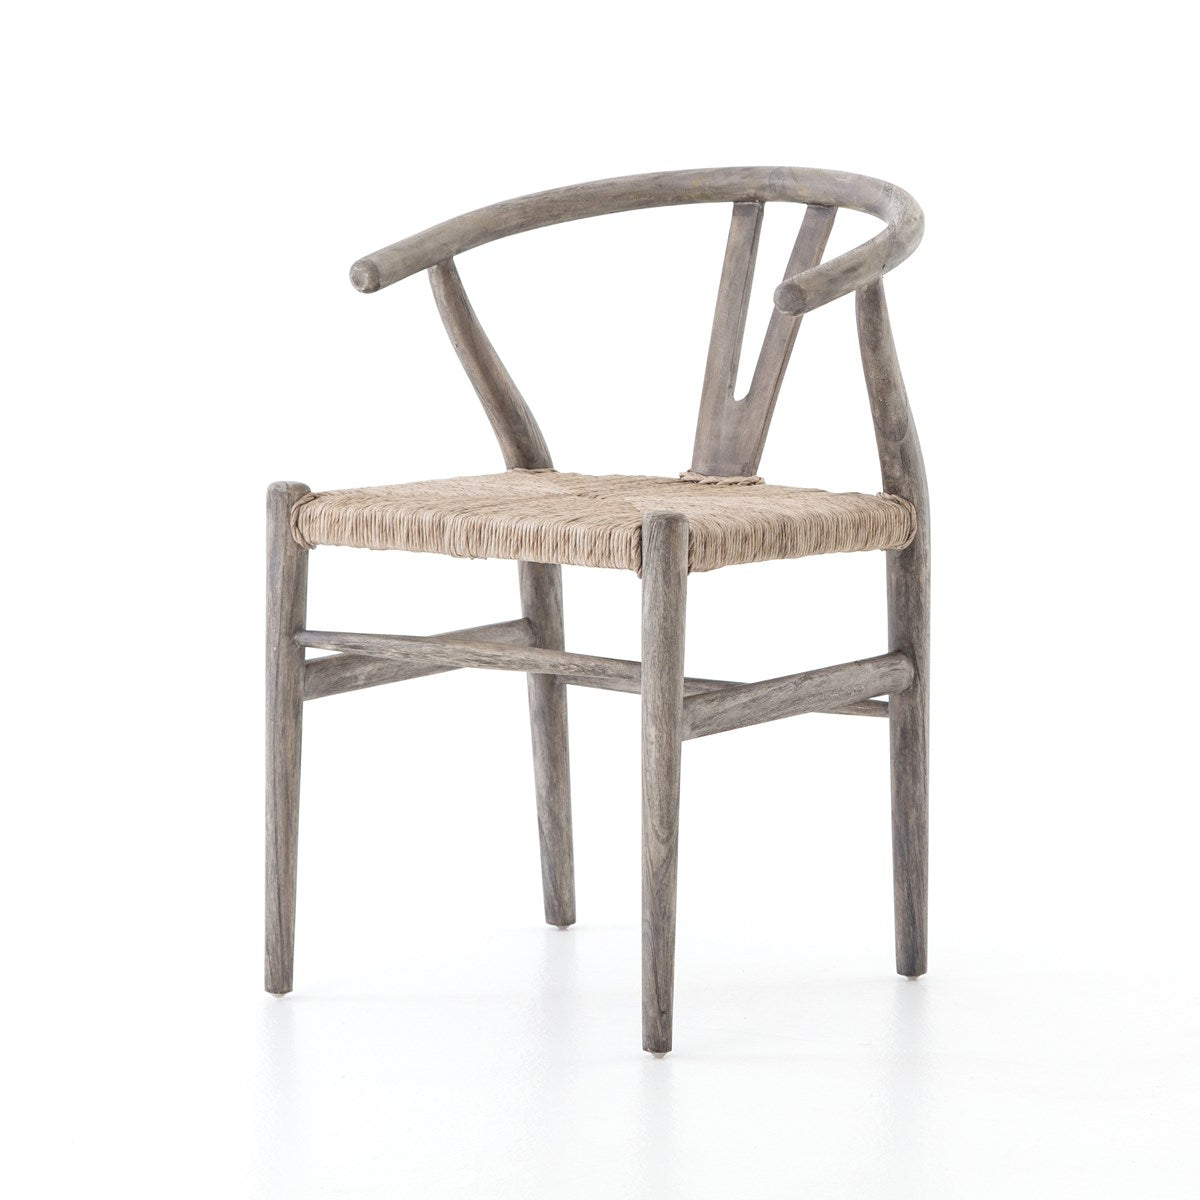 Load image into Gallery viewer, Muestra Dining Chair Weathered GreyDining Chair Four Hands  Weathered Grey   Four Hands, Burke Decor, Mid Century Modern Furniture, Old Bones Furniture Company, Old Bones Co, Modern Mid Century, Designer Furniture, https://www.oldbonesco.com/
